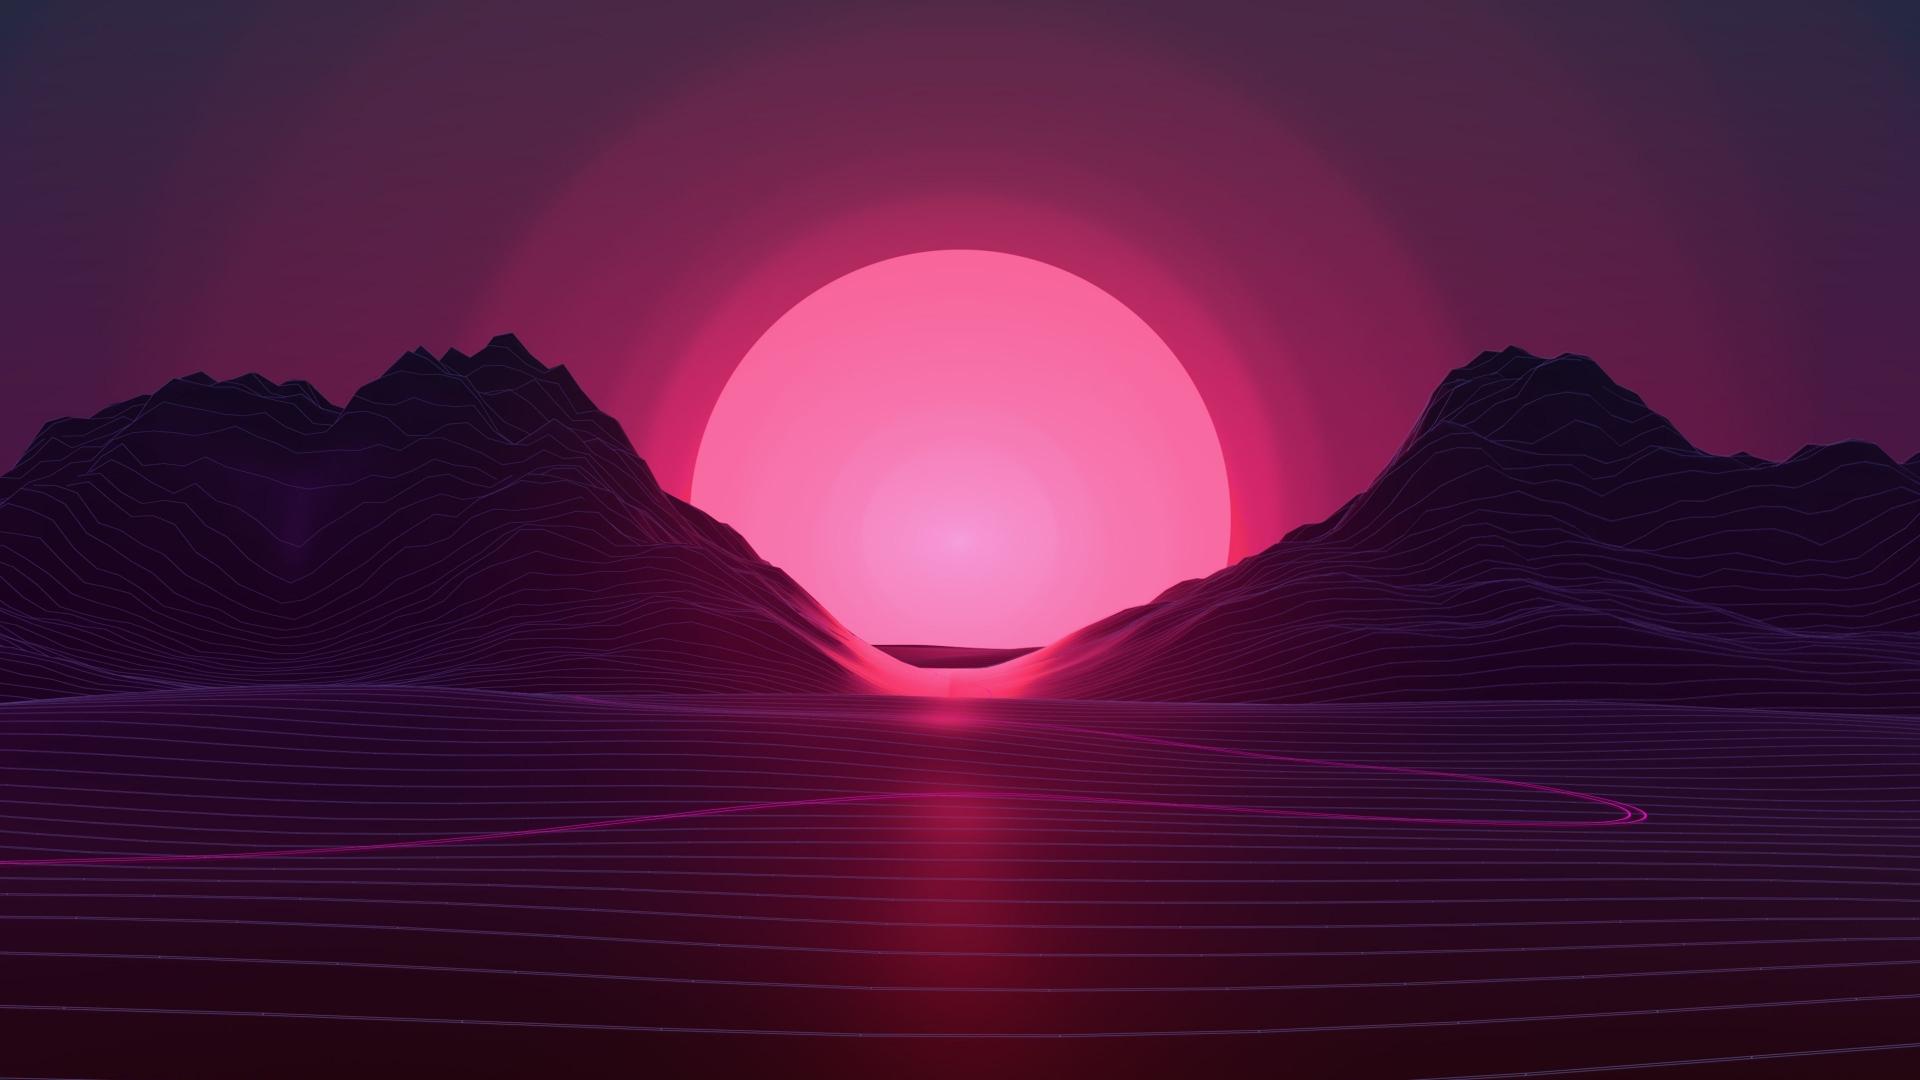 A pink sunset over mountains and water - Pink, neon pink